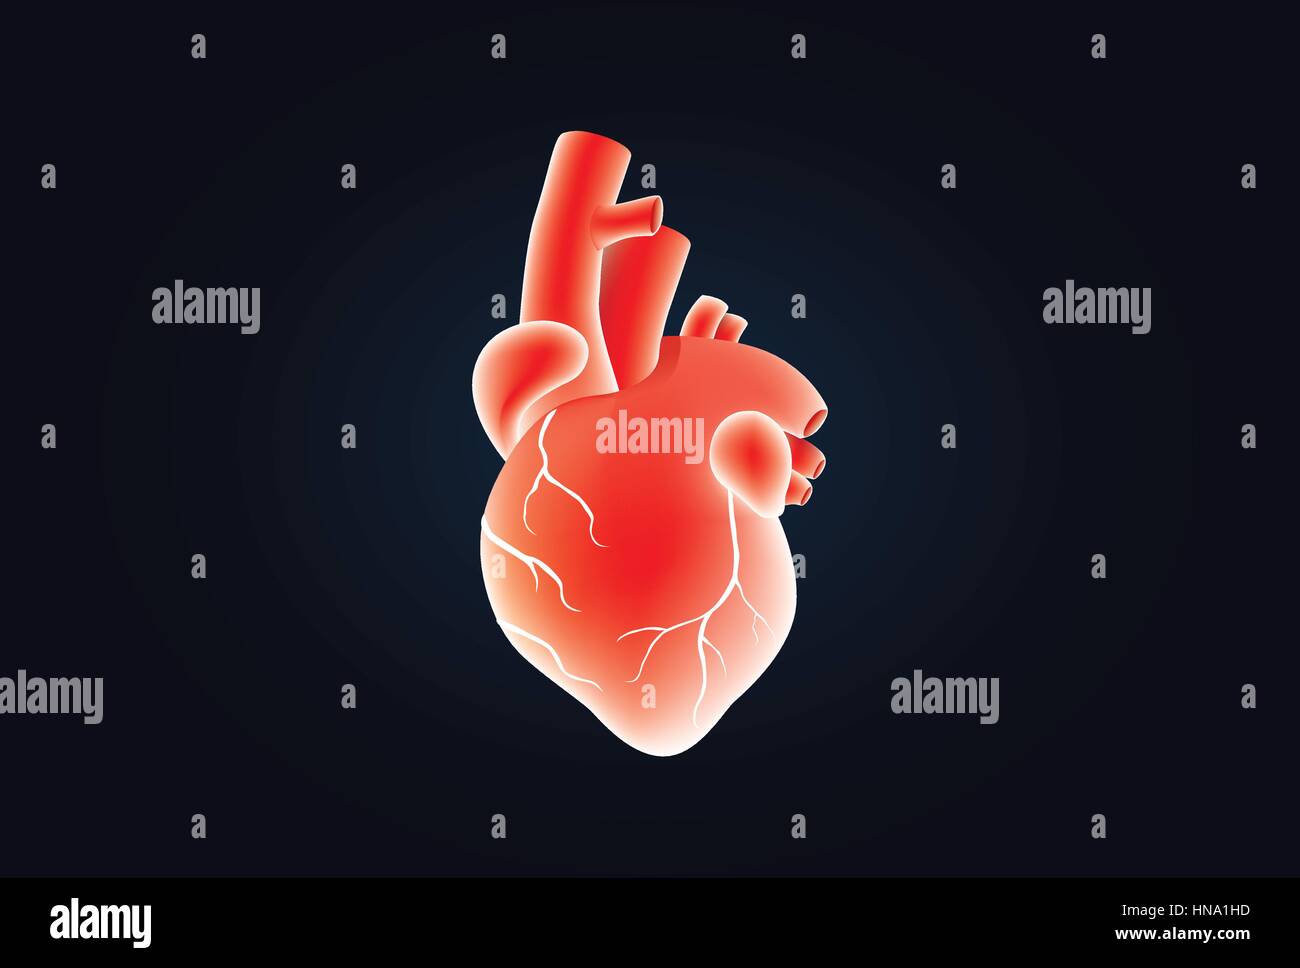 Human heart vector red color on black. Illustration about medical and anatomy. Stock Vector